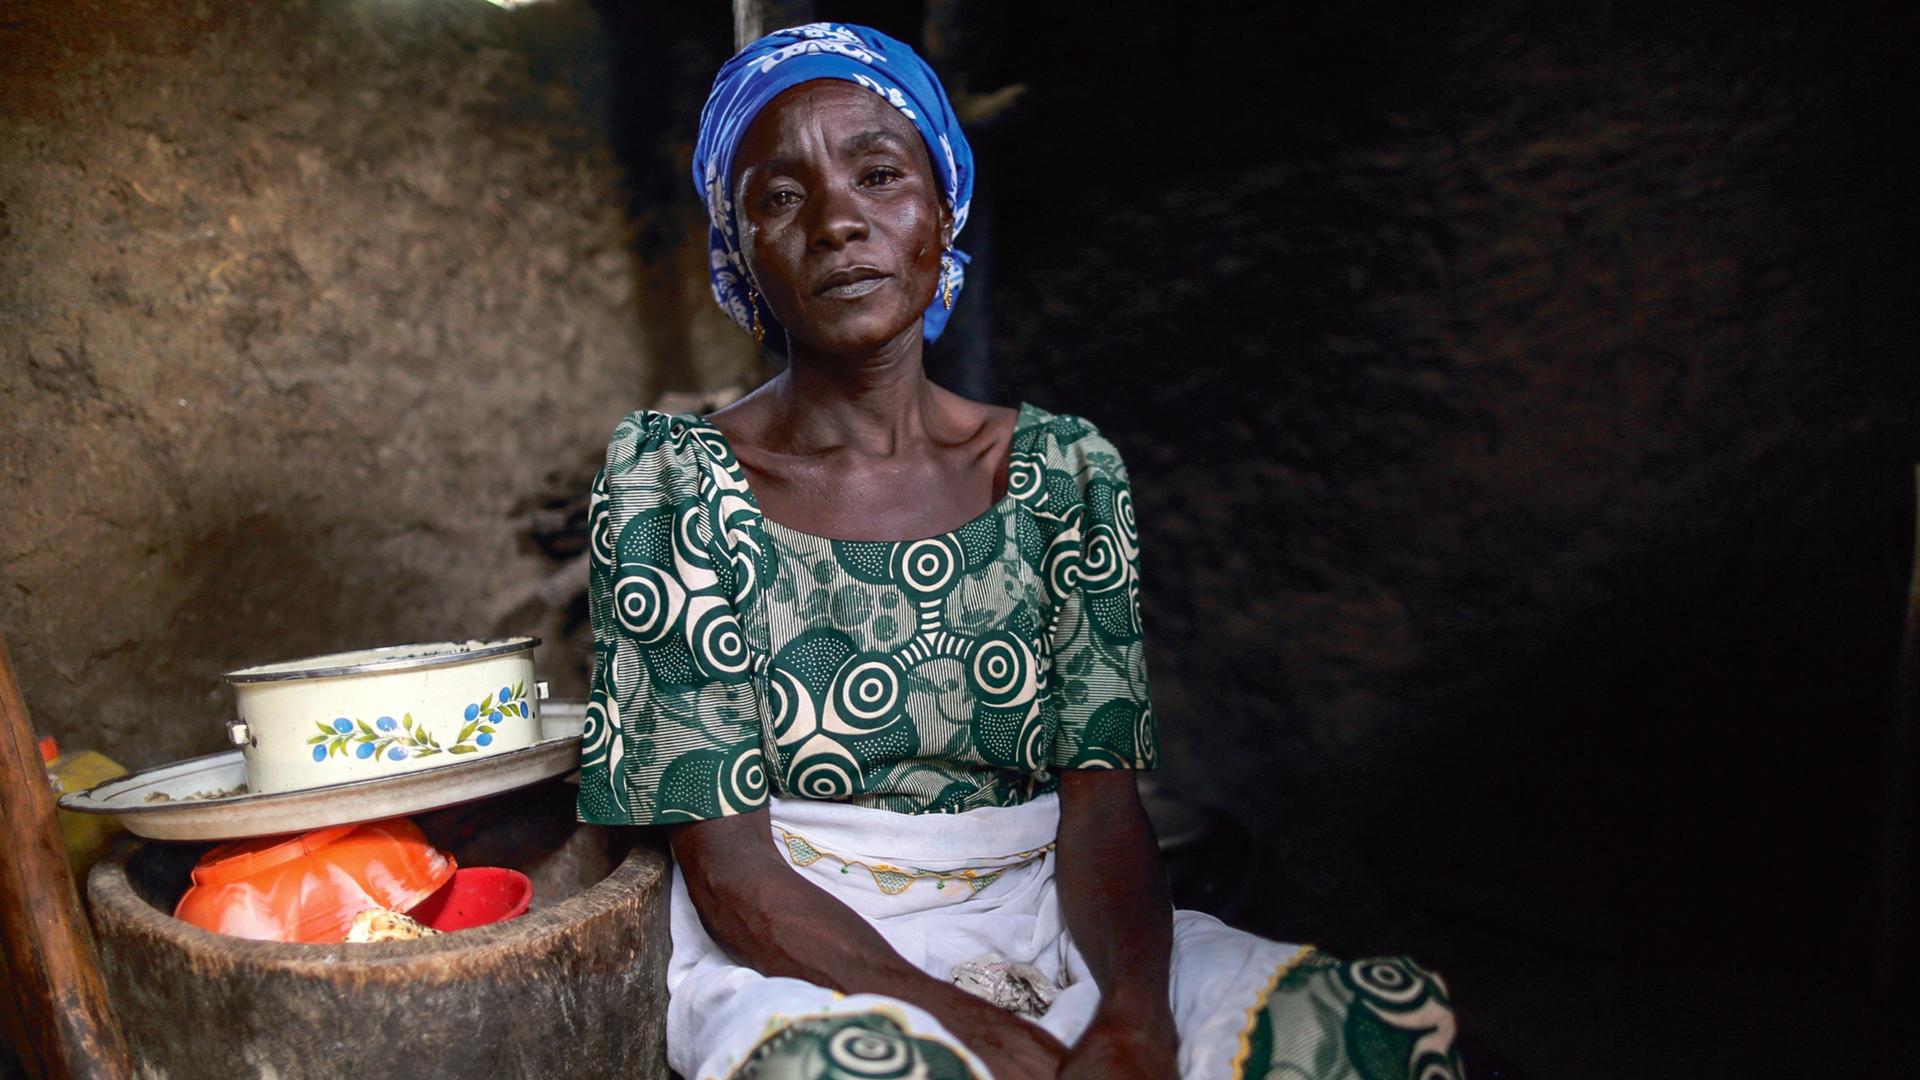 Rifkatu Samuel, the mother of Lugwa Samuel, is pictured in her kitchen in Chibok. She wrote an essay for the book 